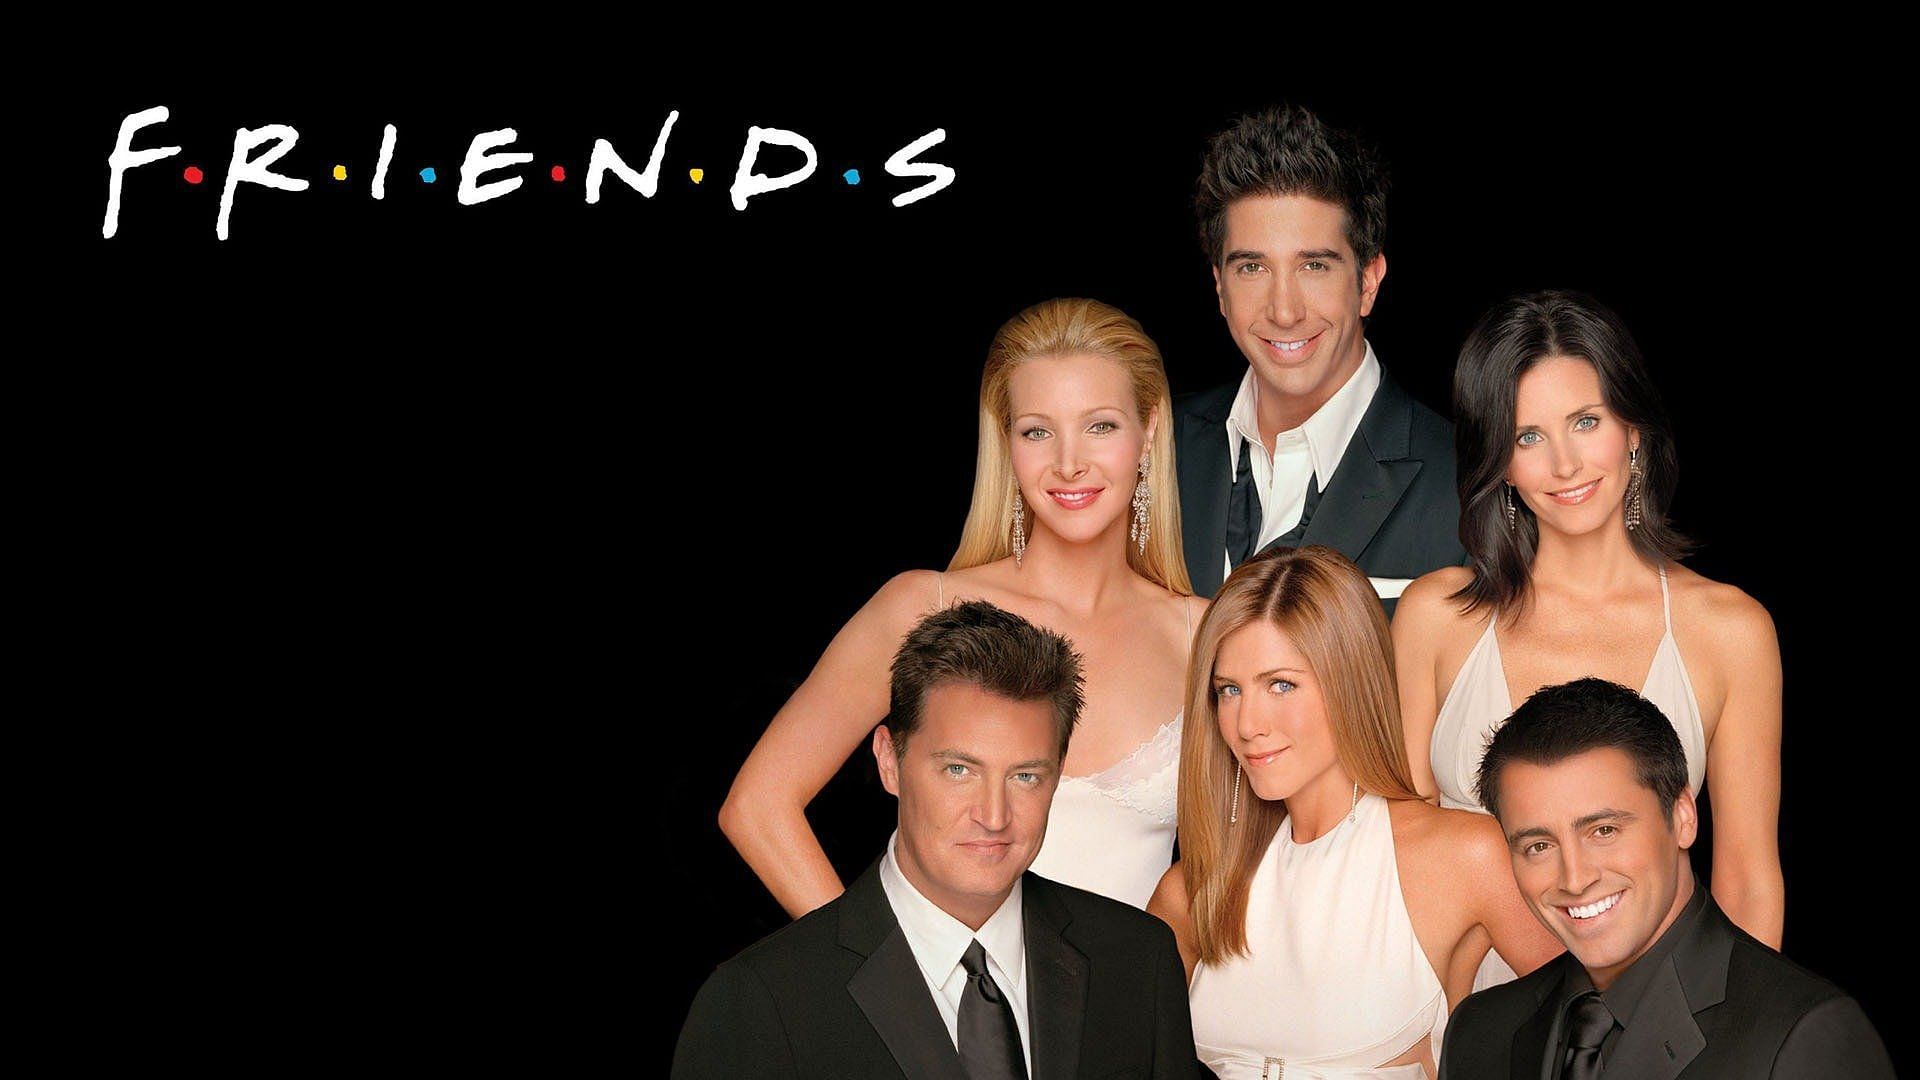 FRIENDS aired from 1994 to 2004. (Photo via NBC)